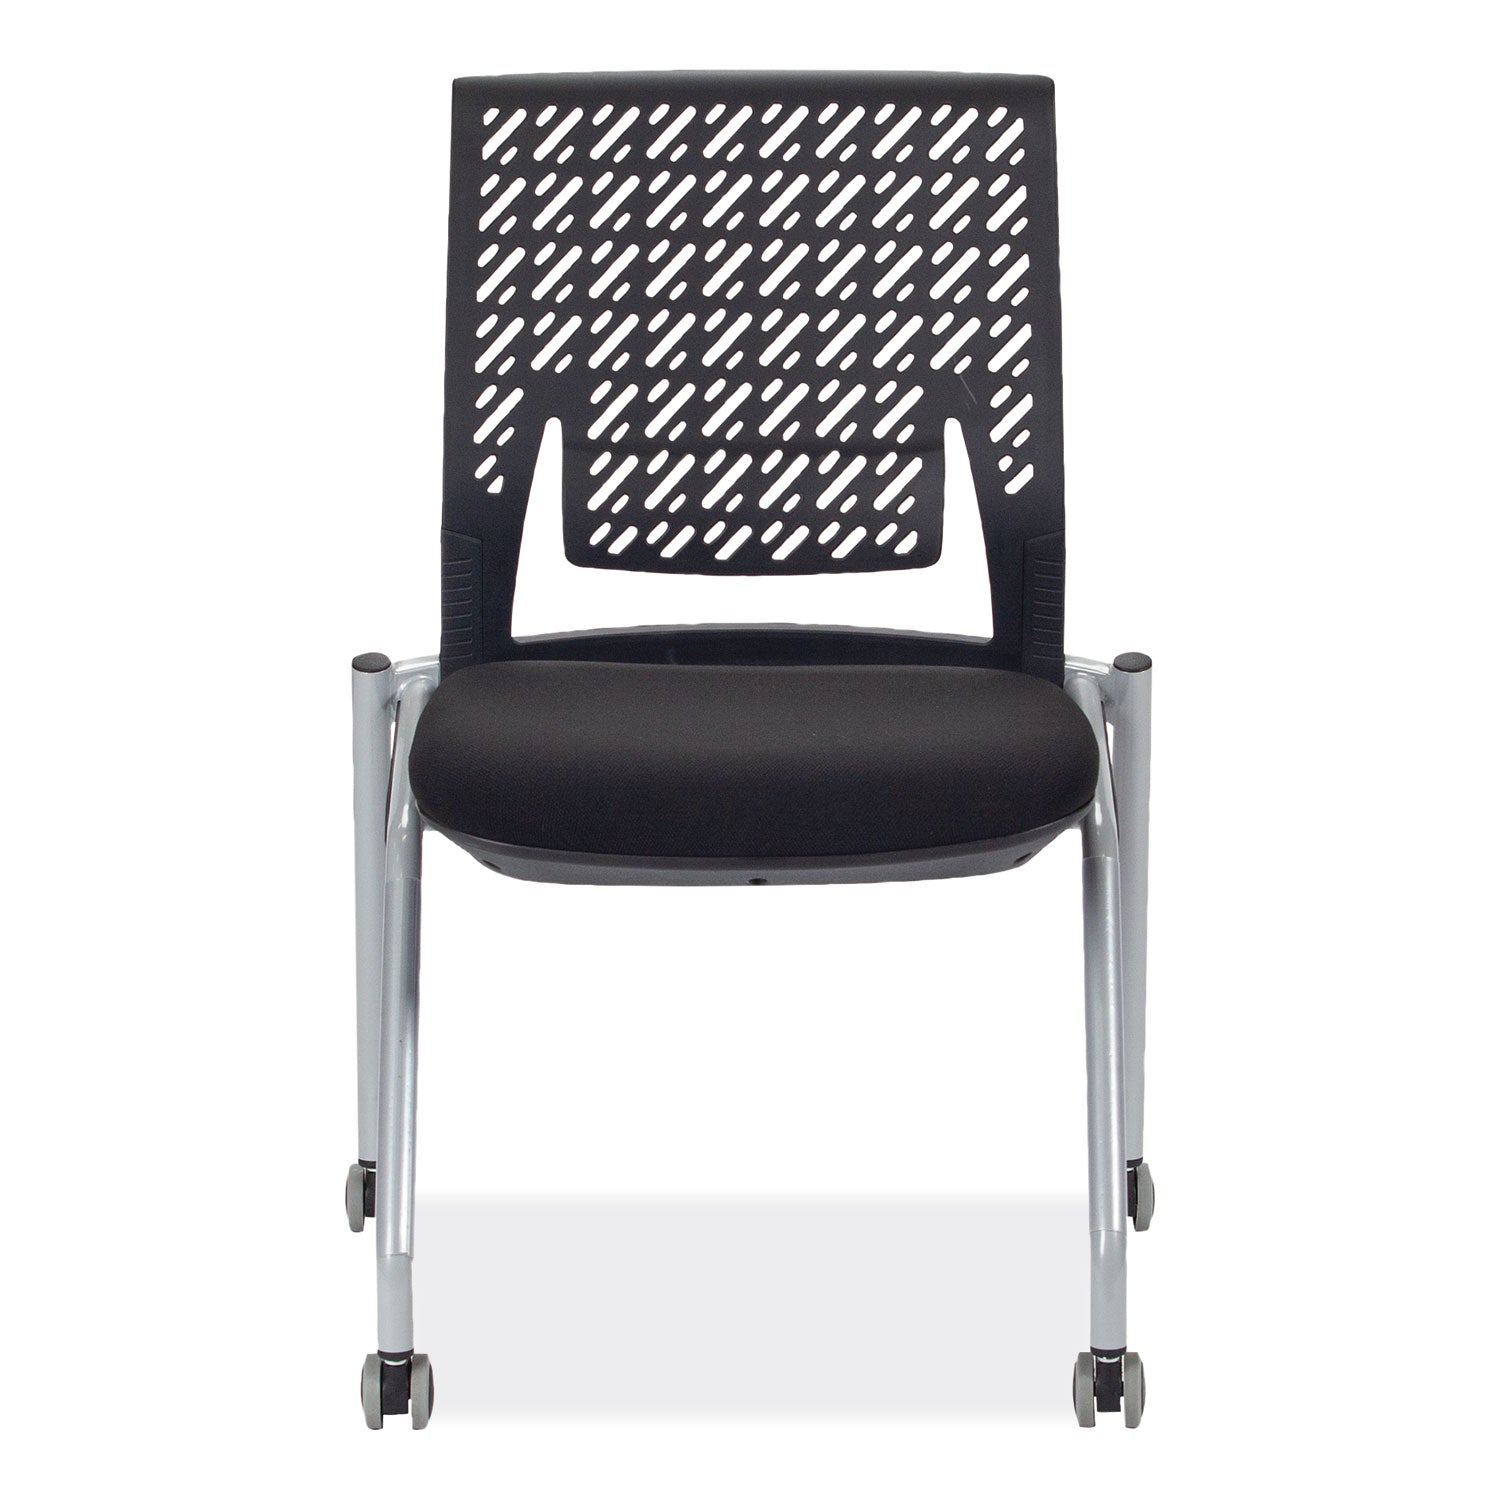 thesis-training-chair-w-flex-back-support-up-to-250-lb-18-high-black-seat-gray-base-2-carton-ships-in-1-3-business-days_safktx2sbblk - 3